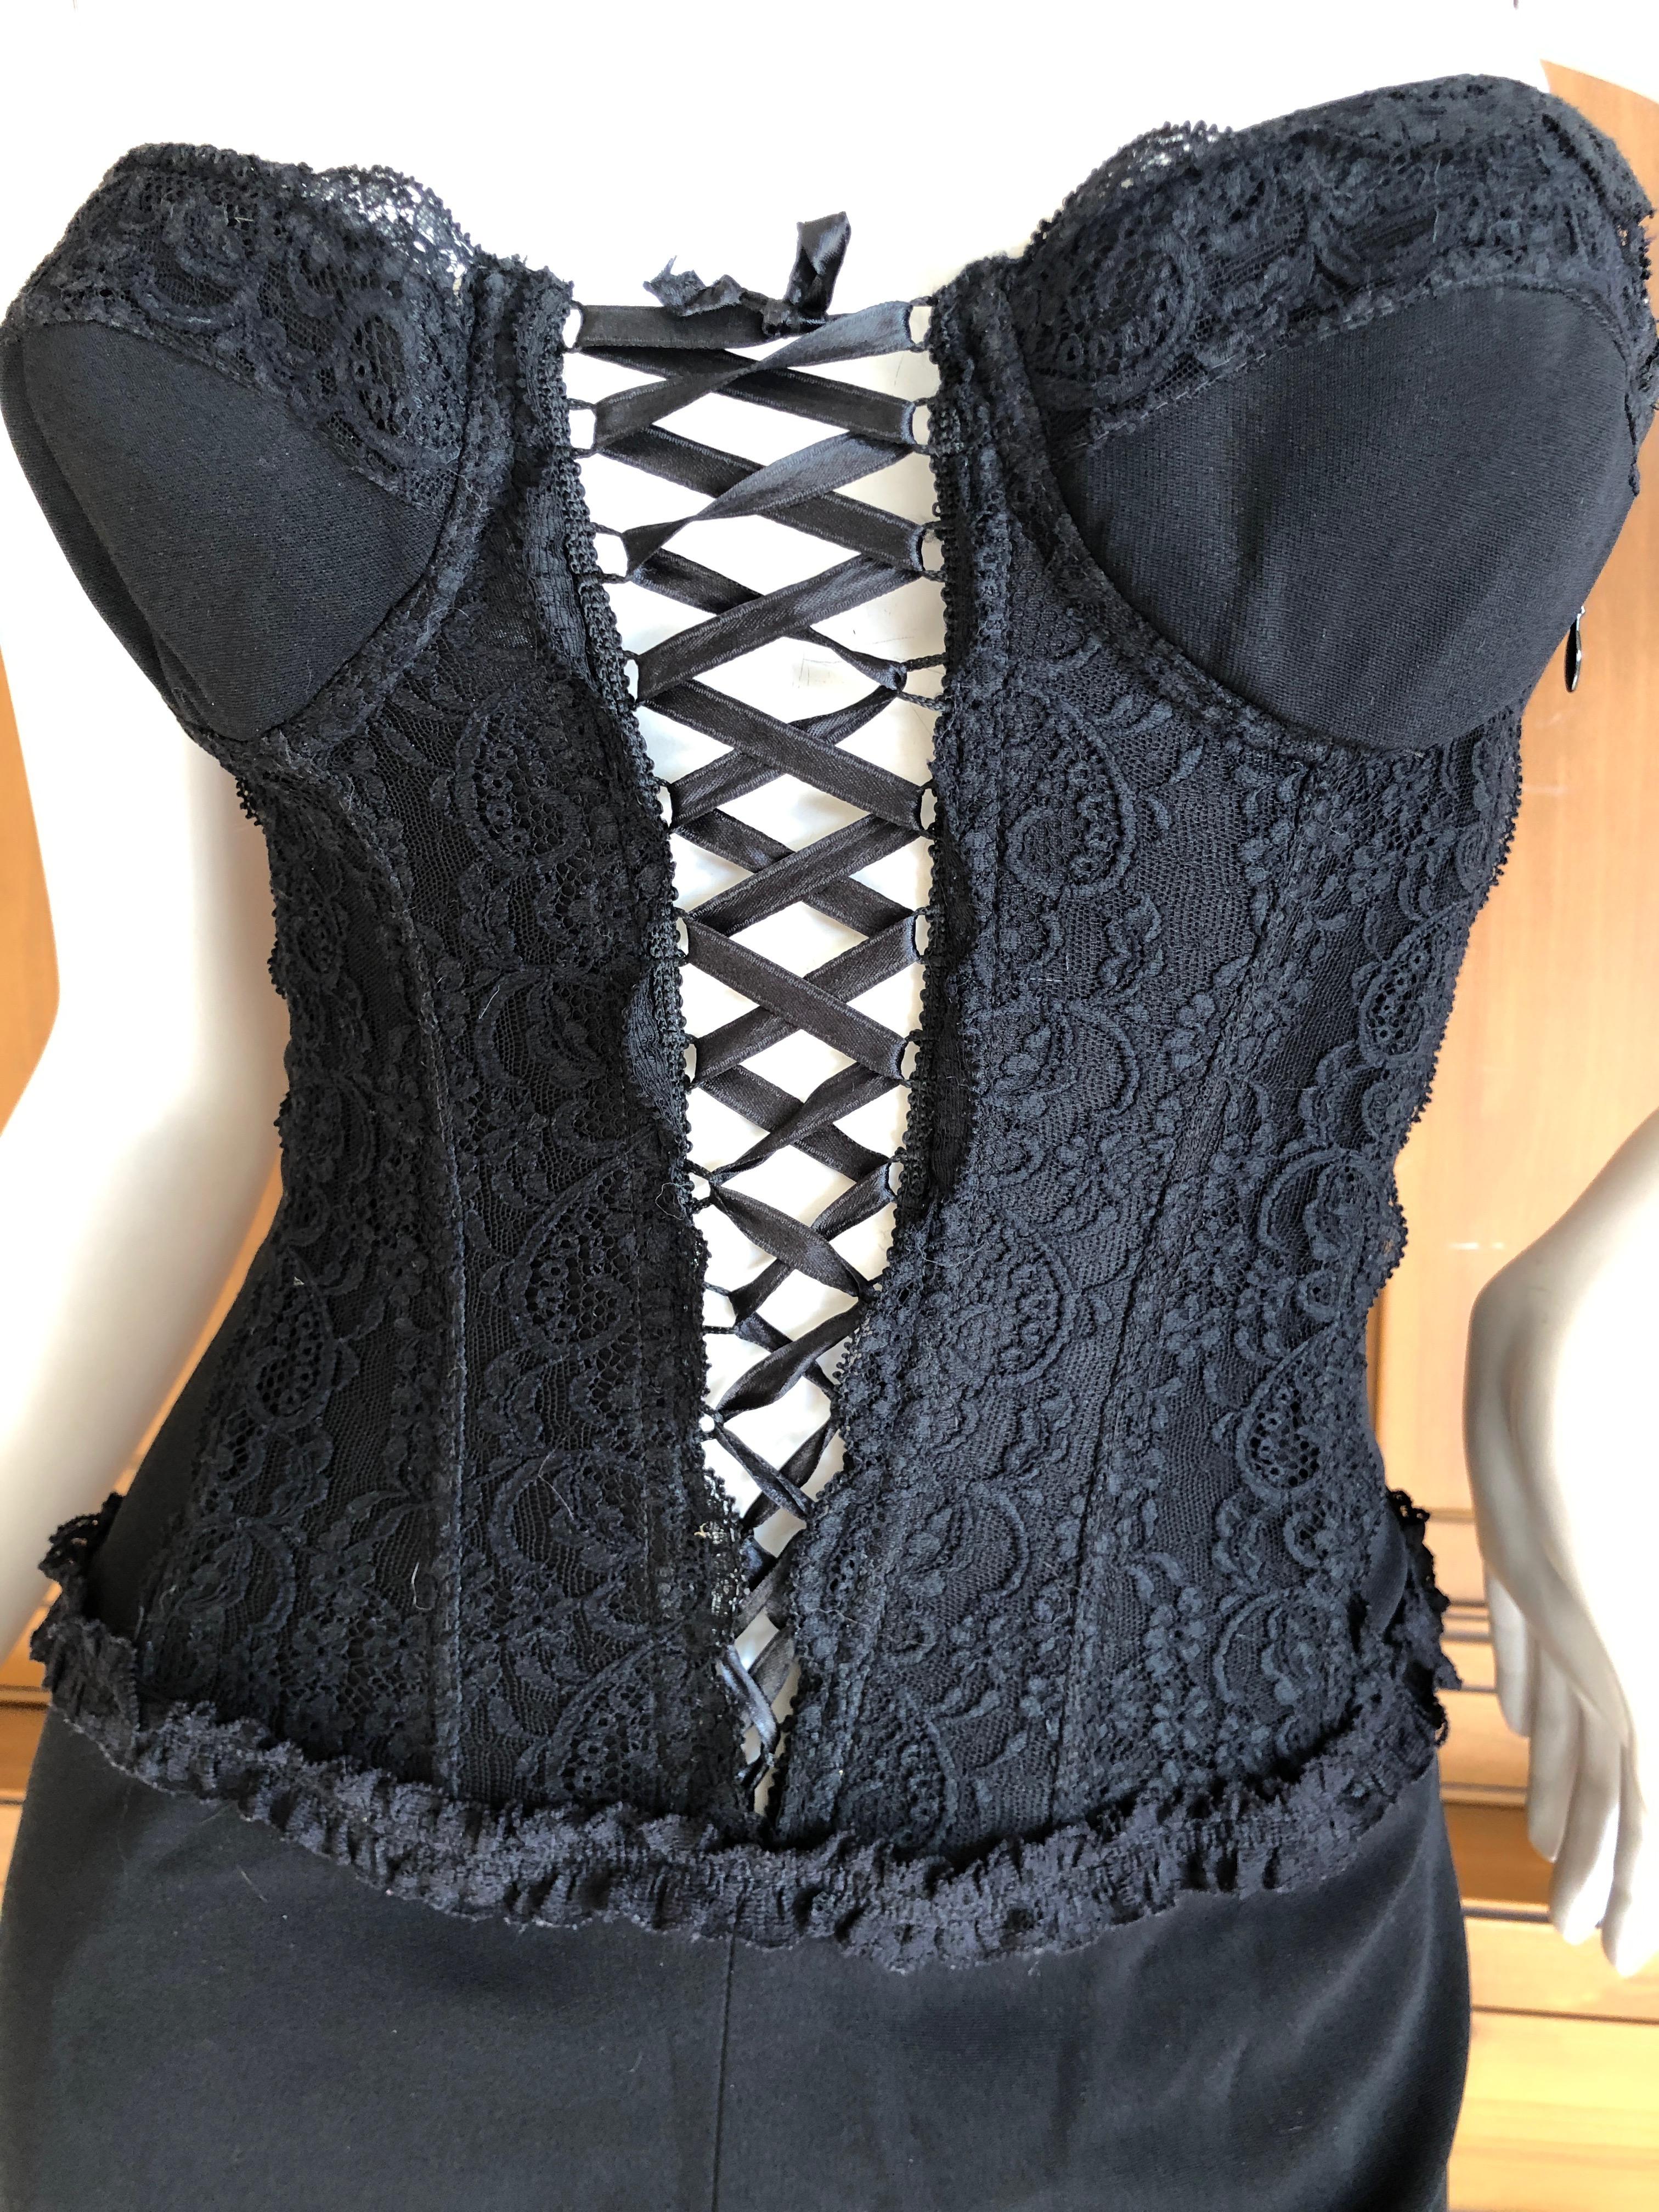 Moschino Cheap & Chic Vintage 1980's Plunging Corset Lace Evening Dress.
There are removable straps
So sexy yet elegant
Size 8
 Bust 34